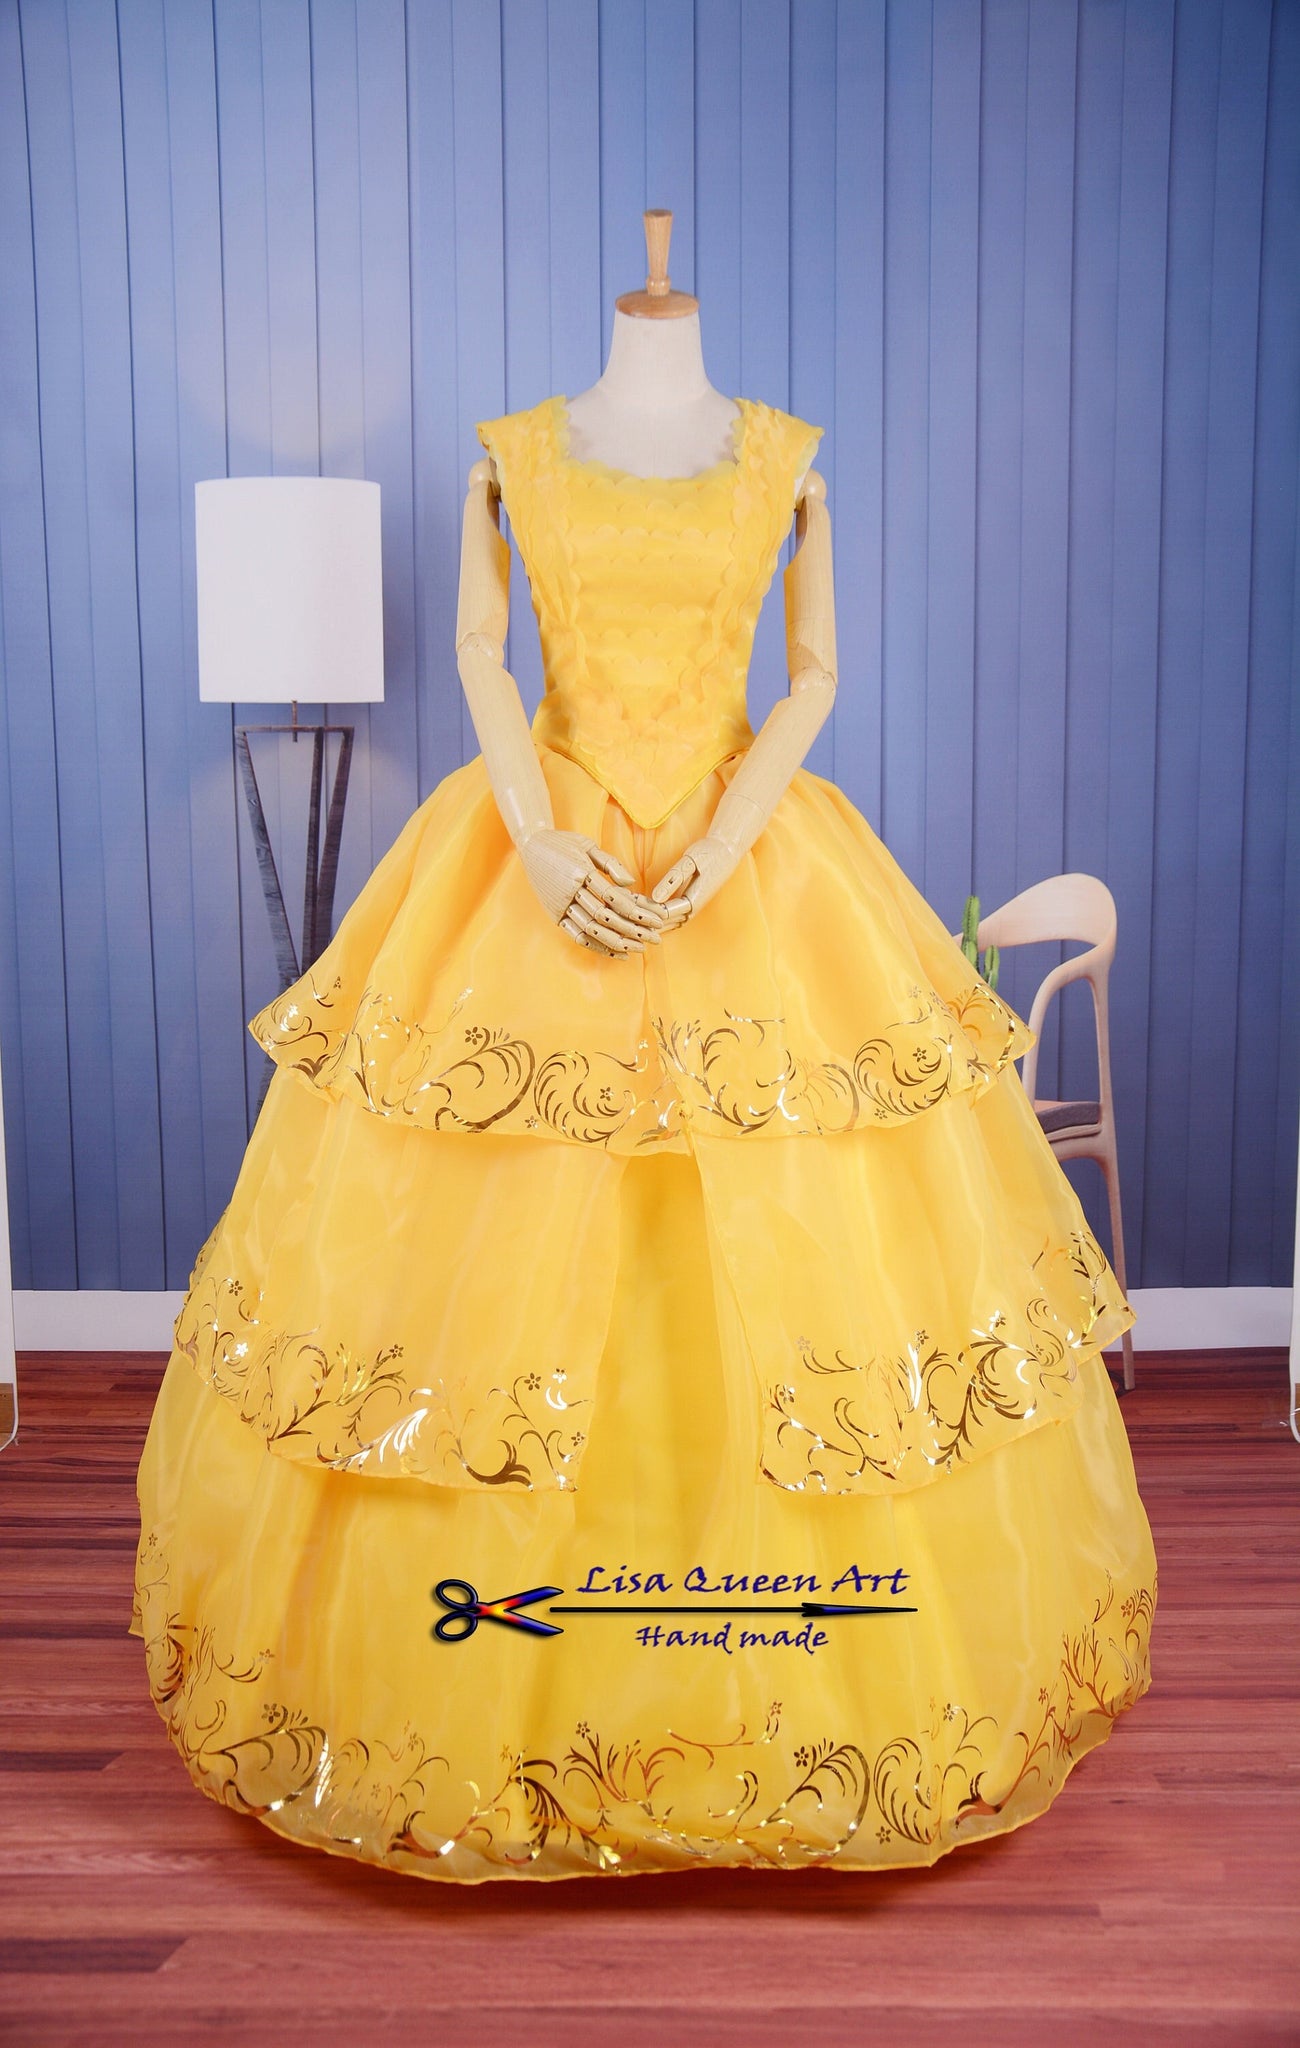 Belle cosplay costume Belle Sundress Beauty and Beast Princess